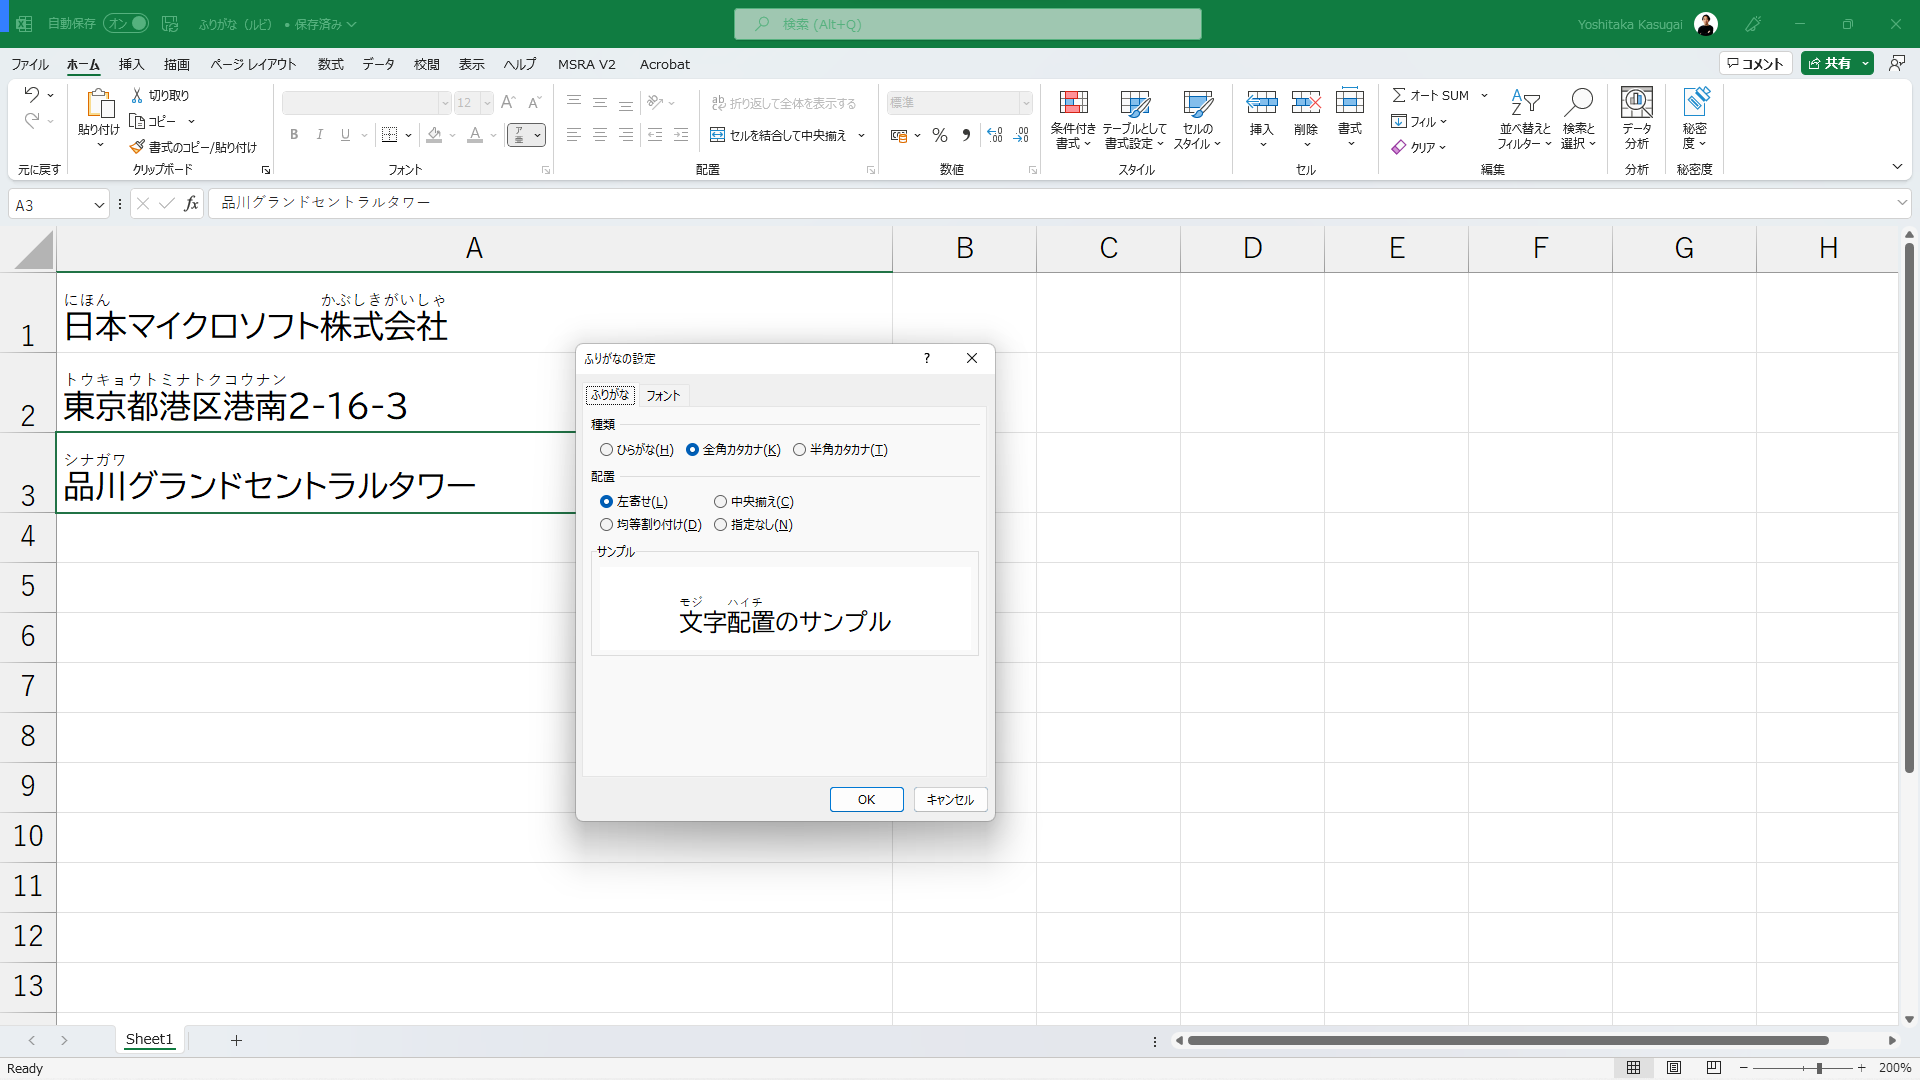 MC442107: Microsoft Excel Online: Support for the Furigana (Phonetics) Feature